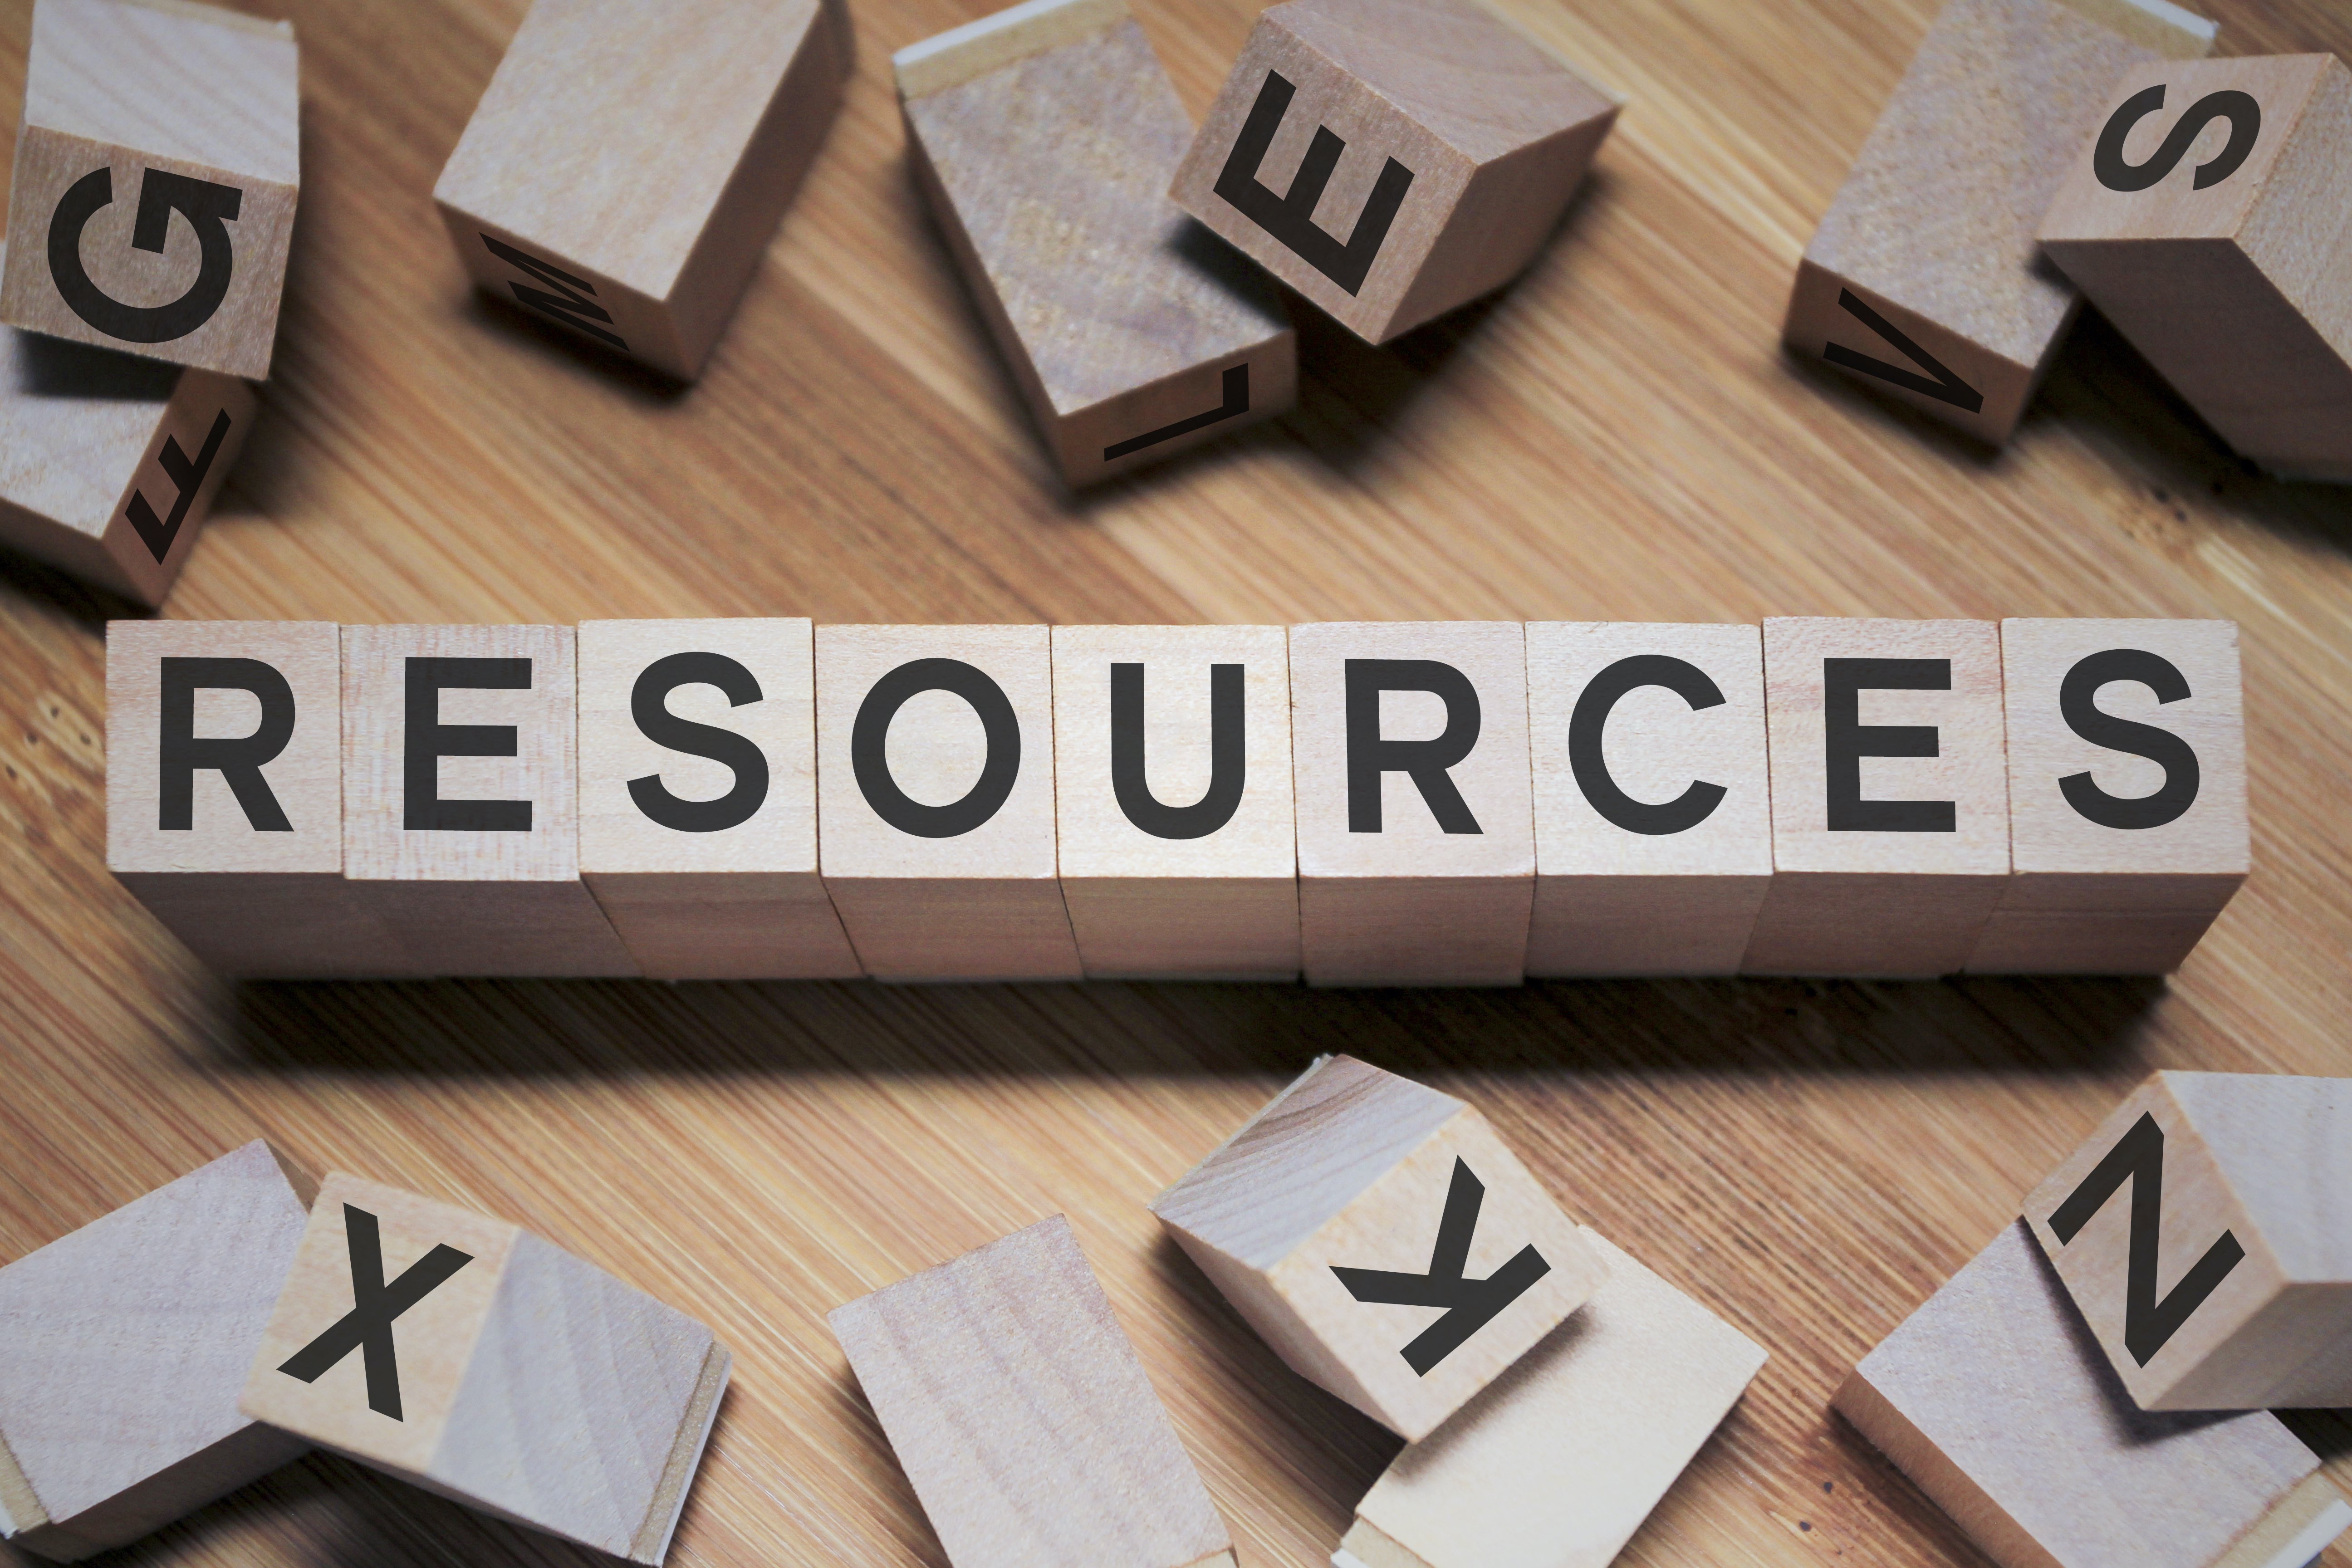 Row of wooden block letters that spell "resources".